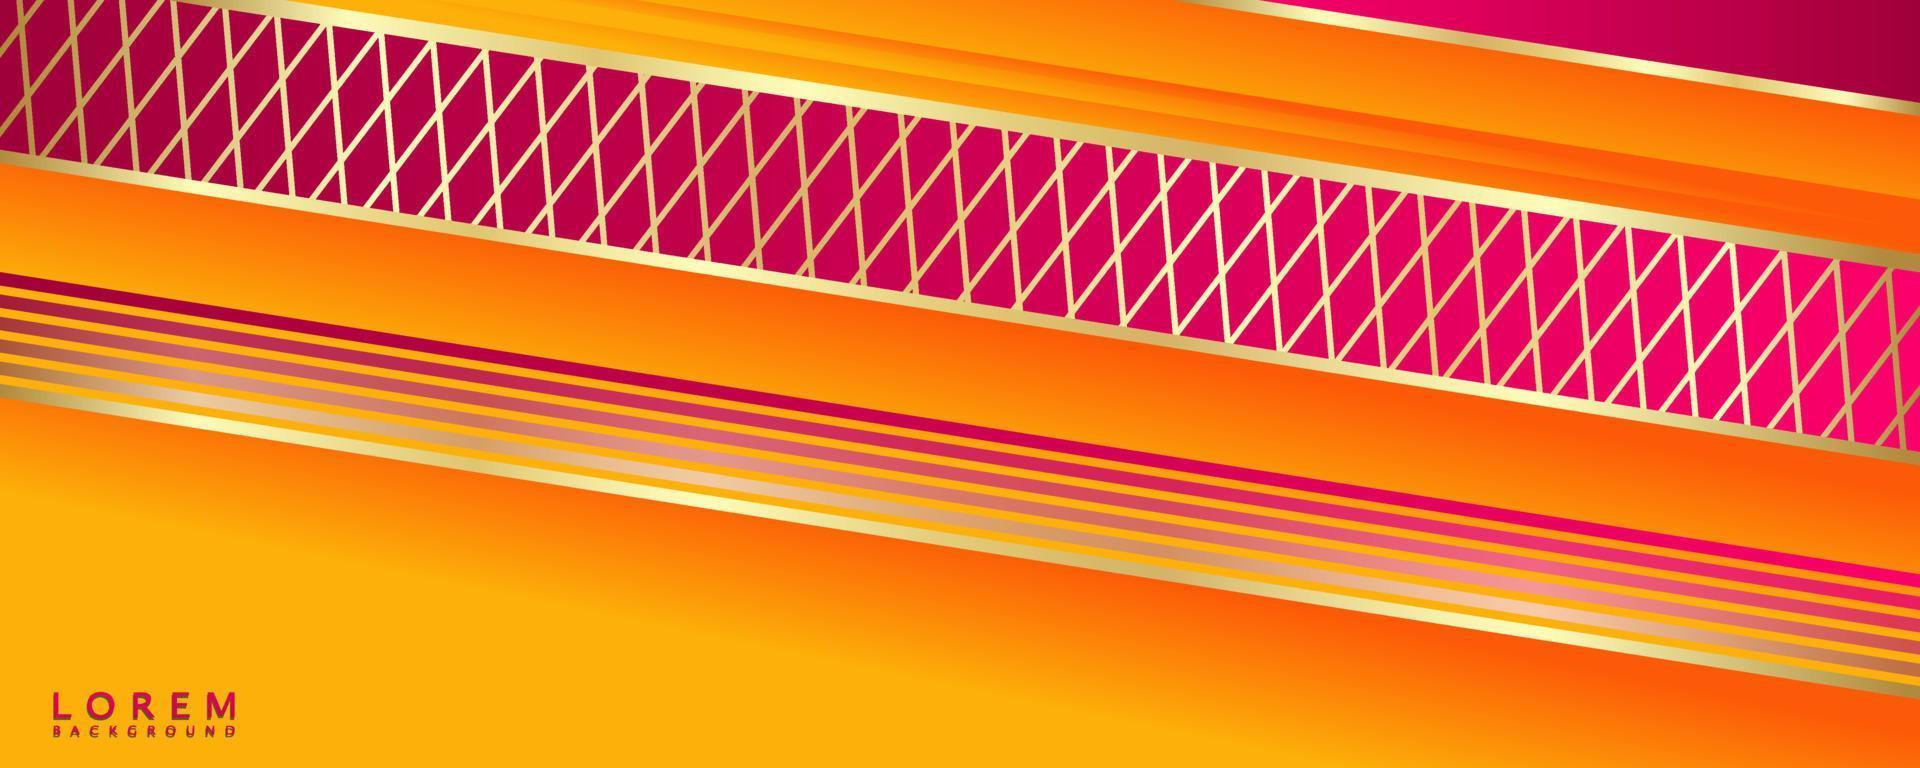 Abstract orange and yellow Background with stripes vector